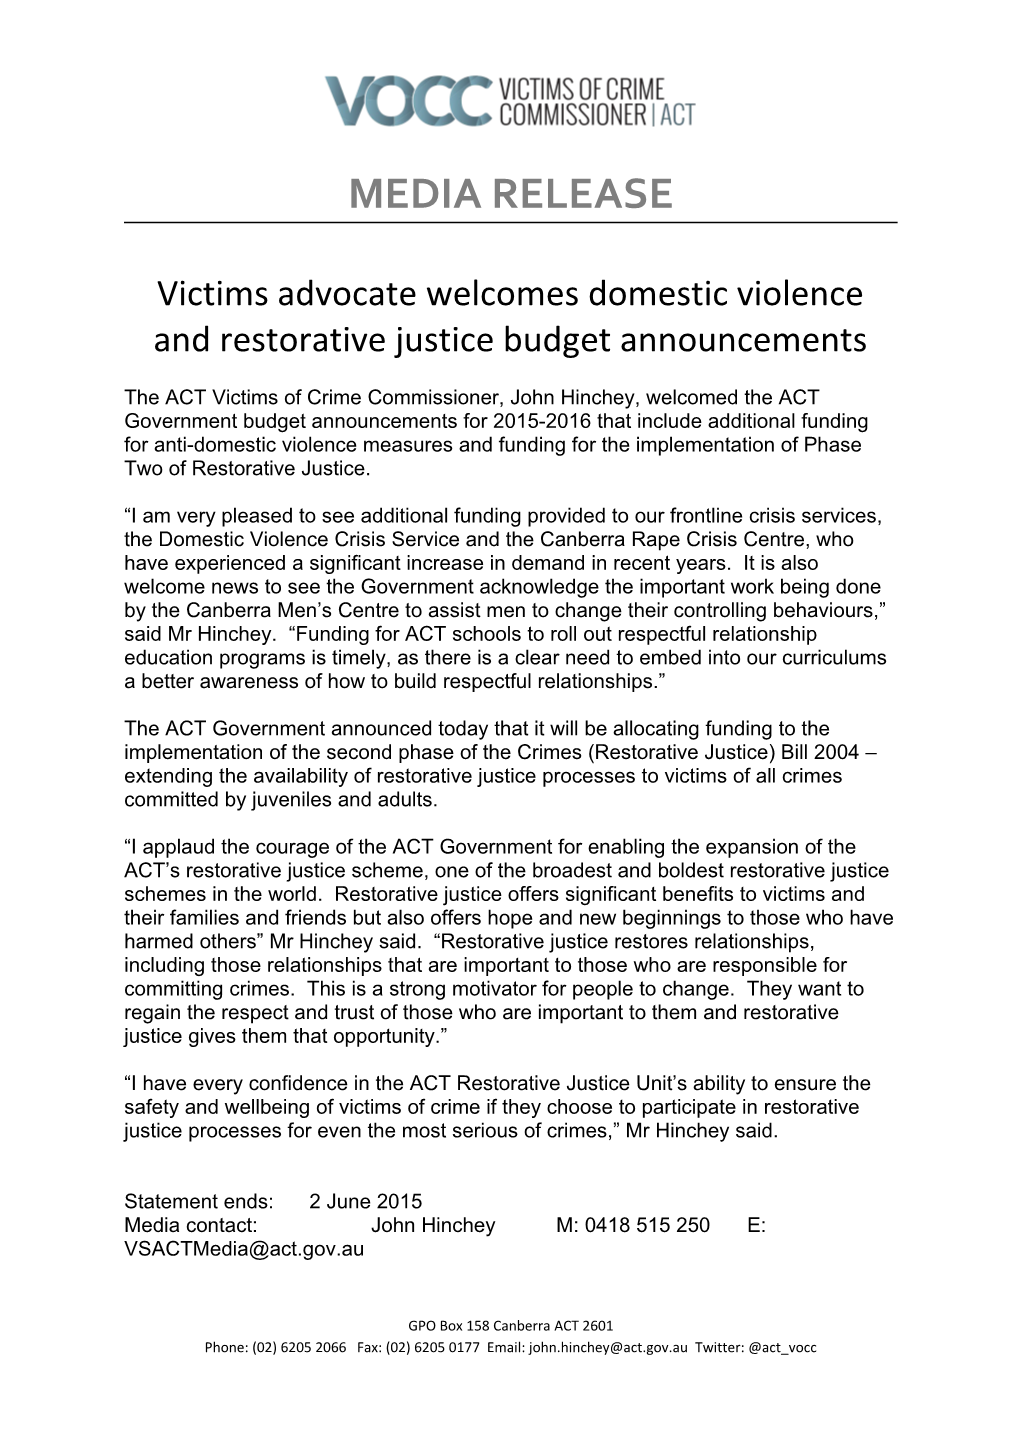 Victims Advocate Welcomes Domestic Violence and Restorative Justice Budget Announcements